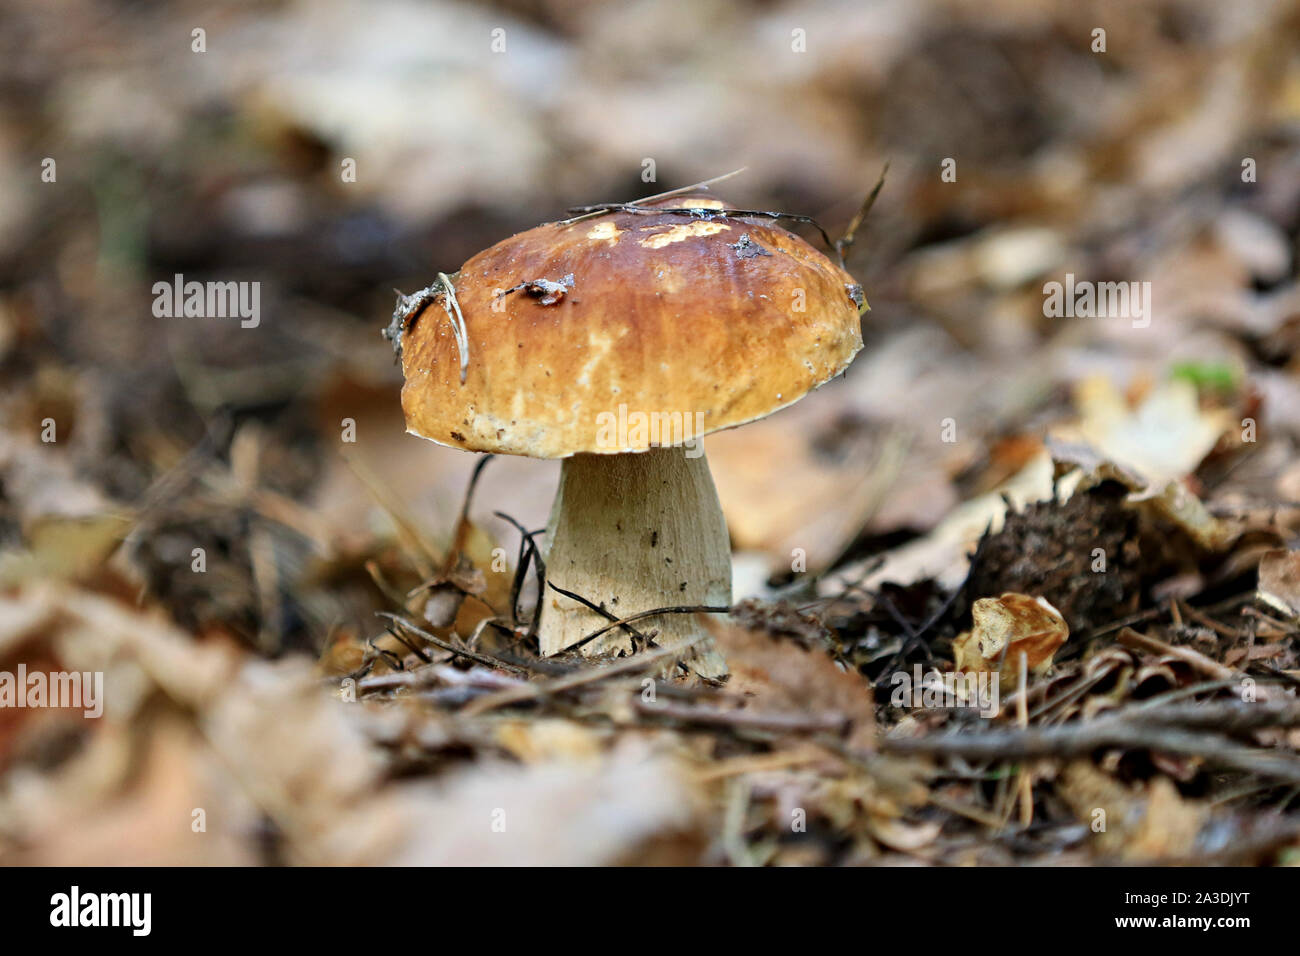 mushroom in forest Stock Photo